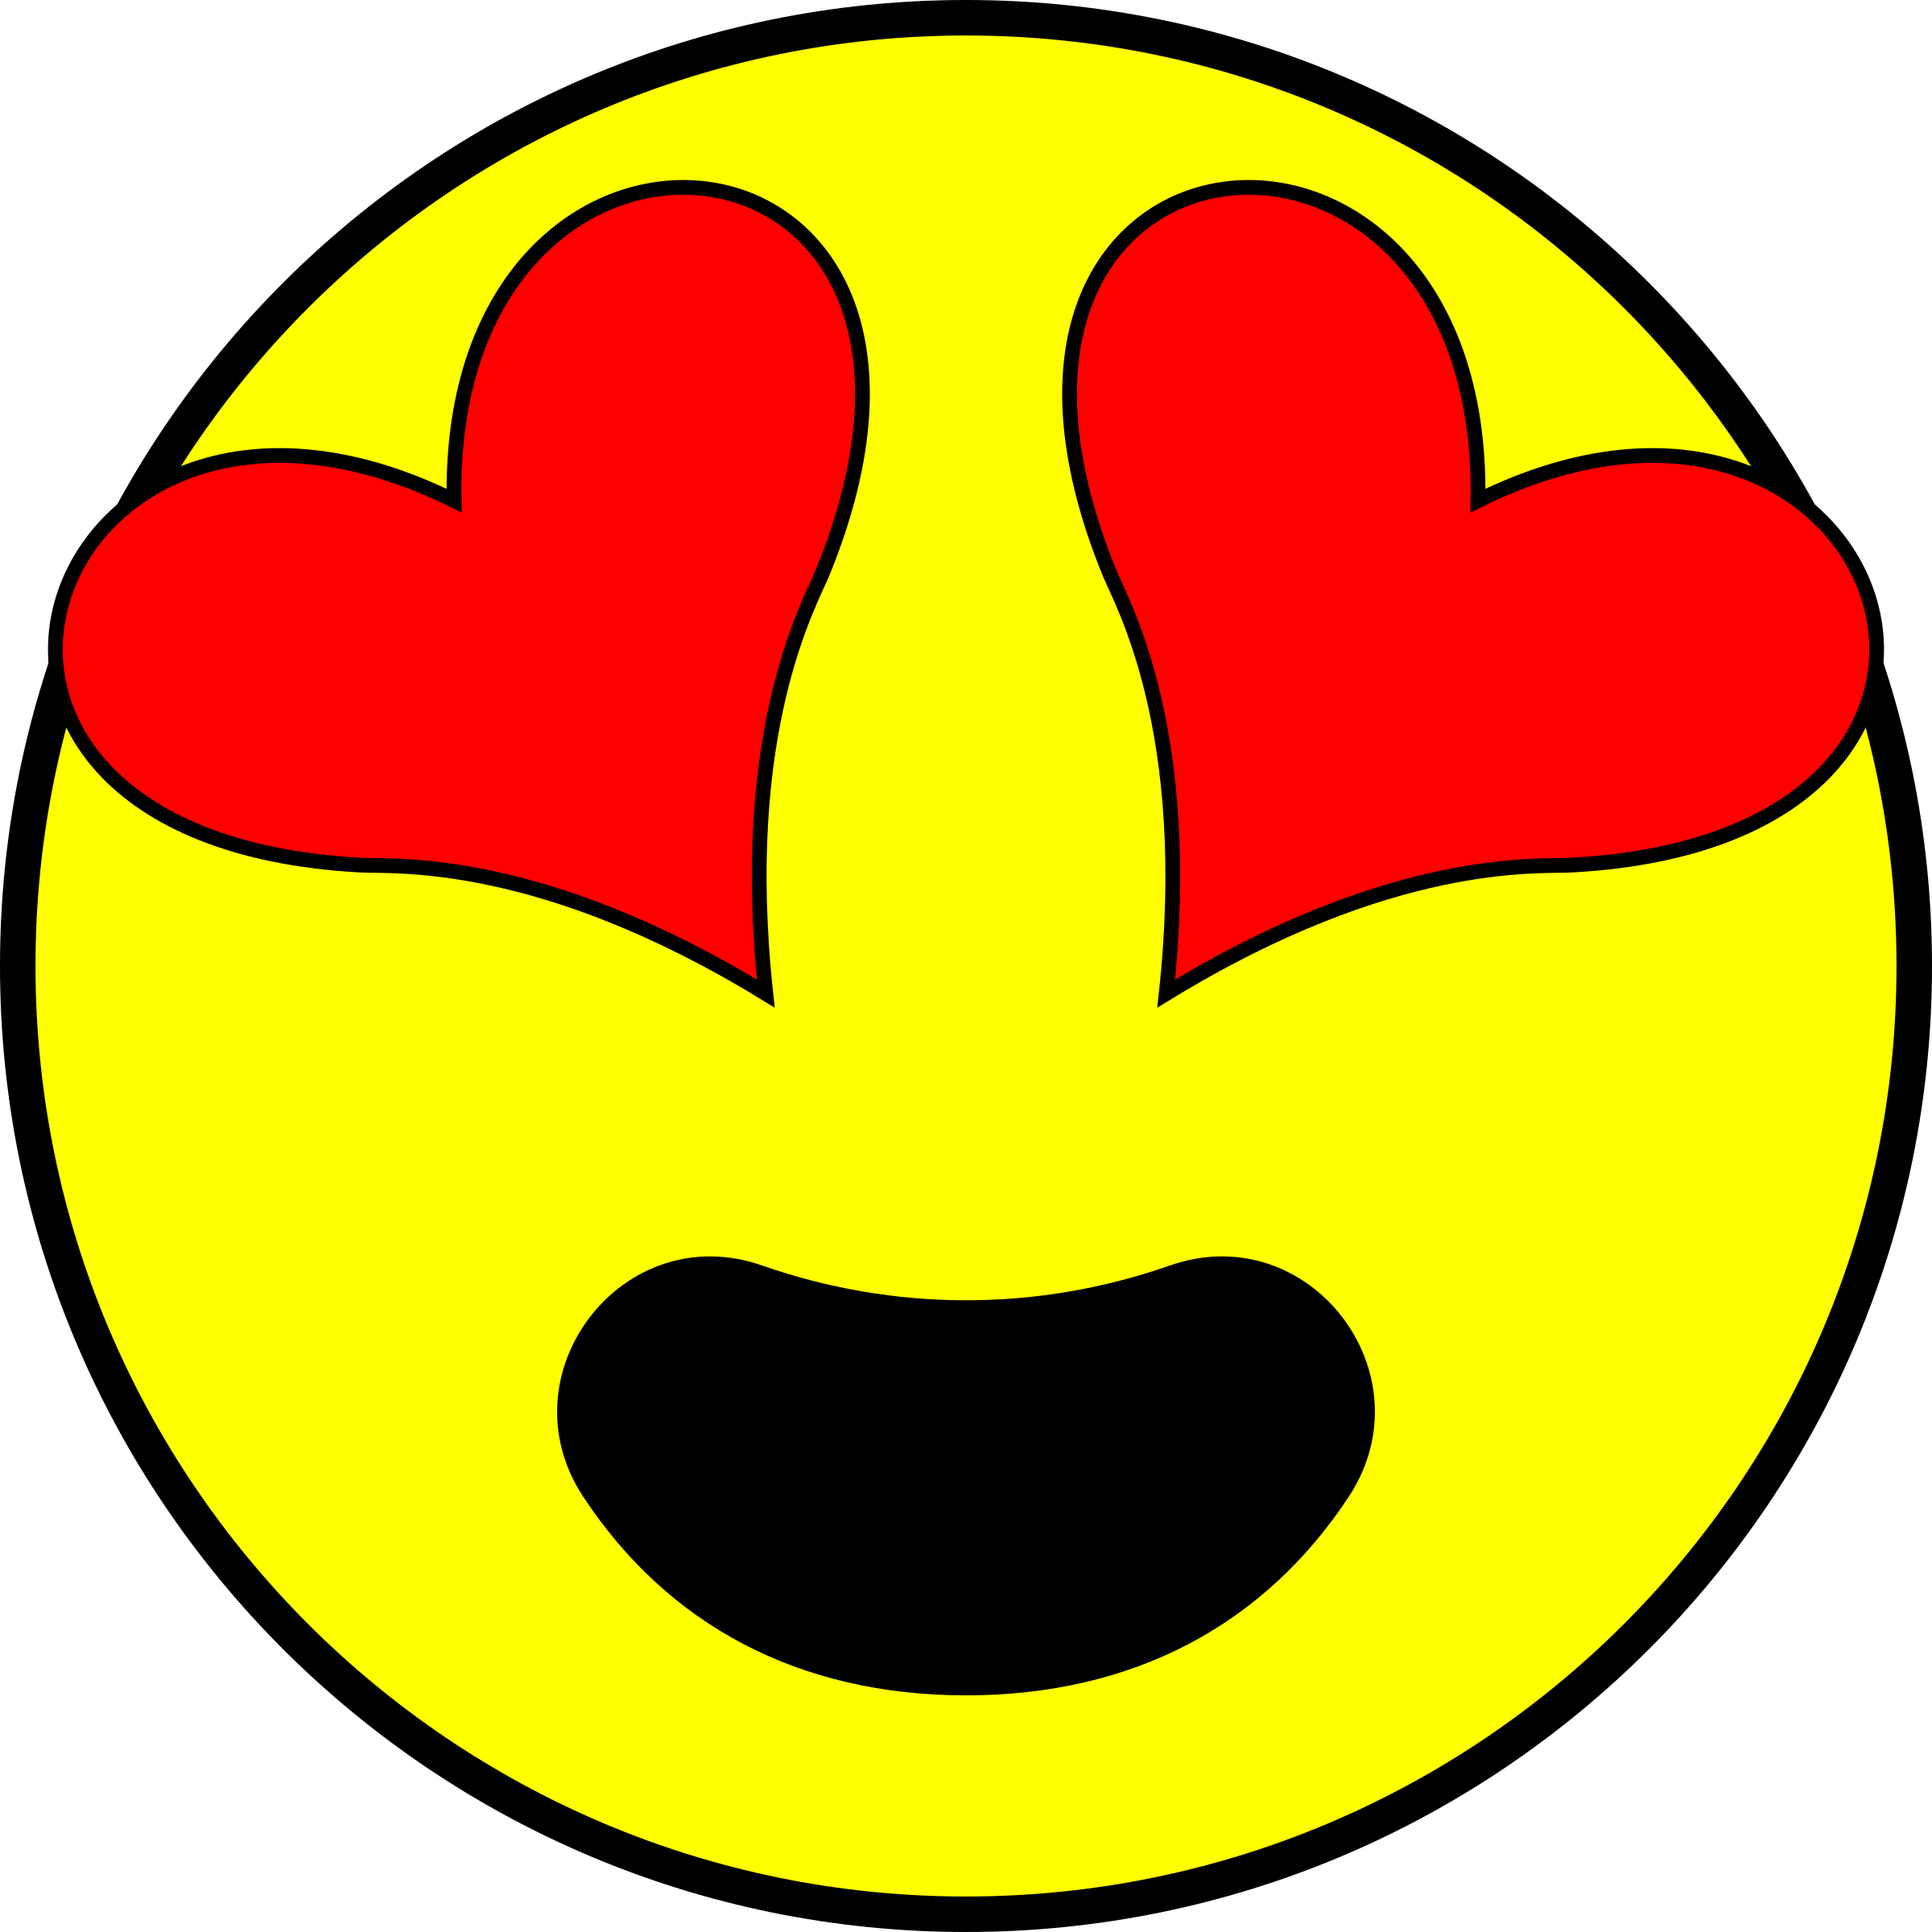 Smiley Emoticon Face Emoji Smiley Heart Animaatio Png Pngegg Images And Photos Finder 